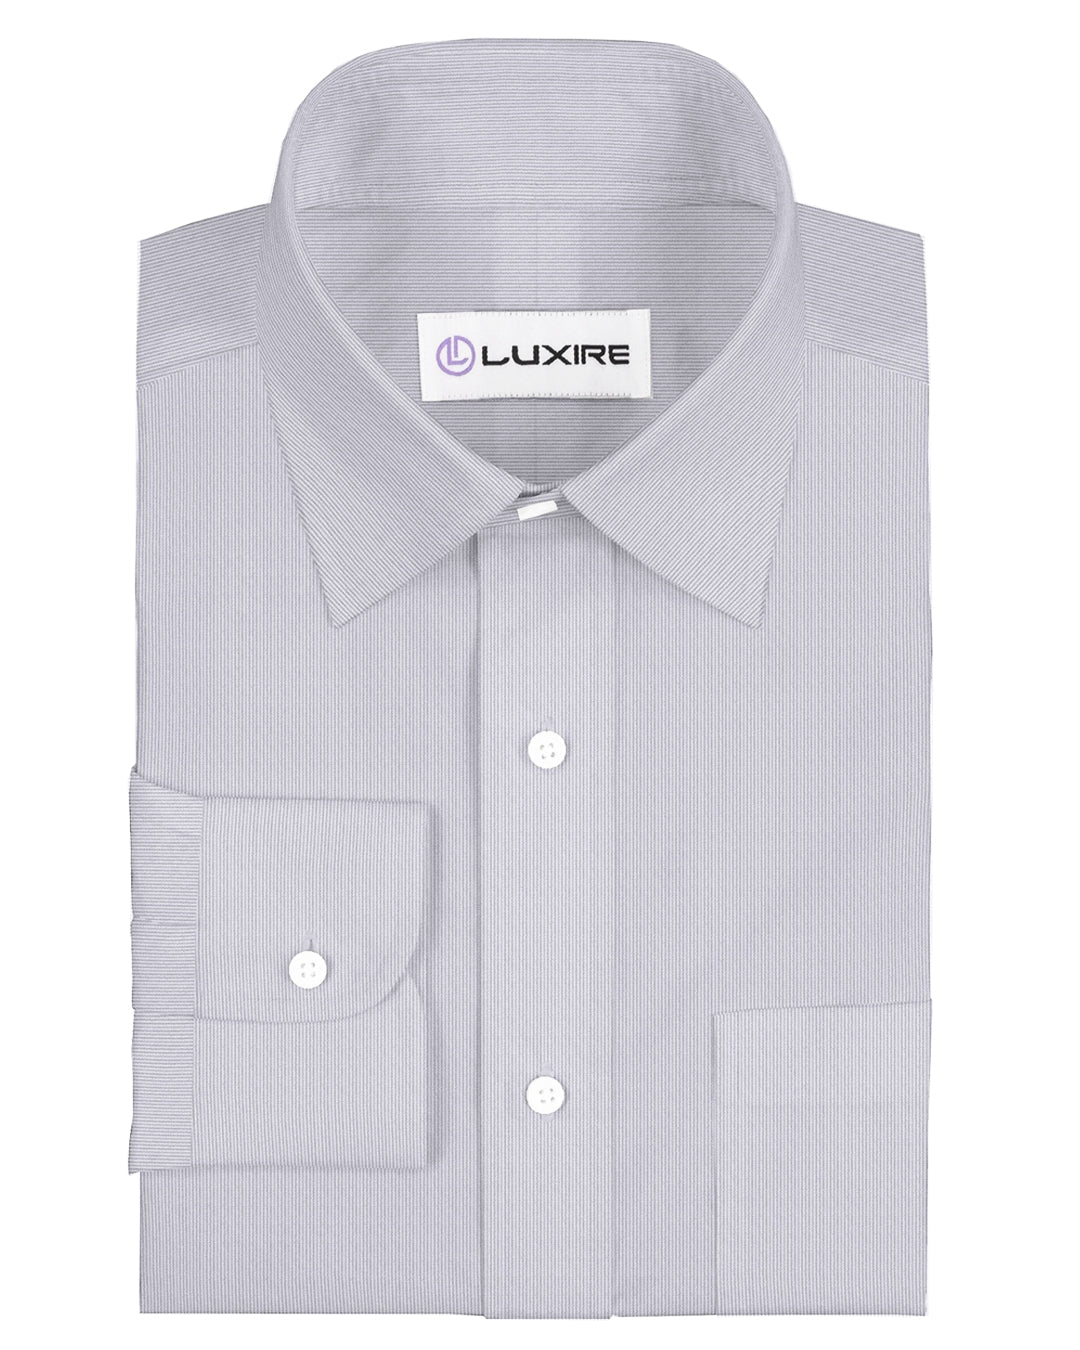 Front of the custom linen shirt for men in white with grey stripes by Luxire Clothing